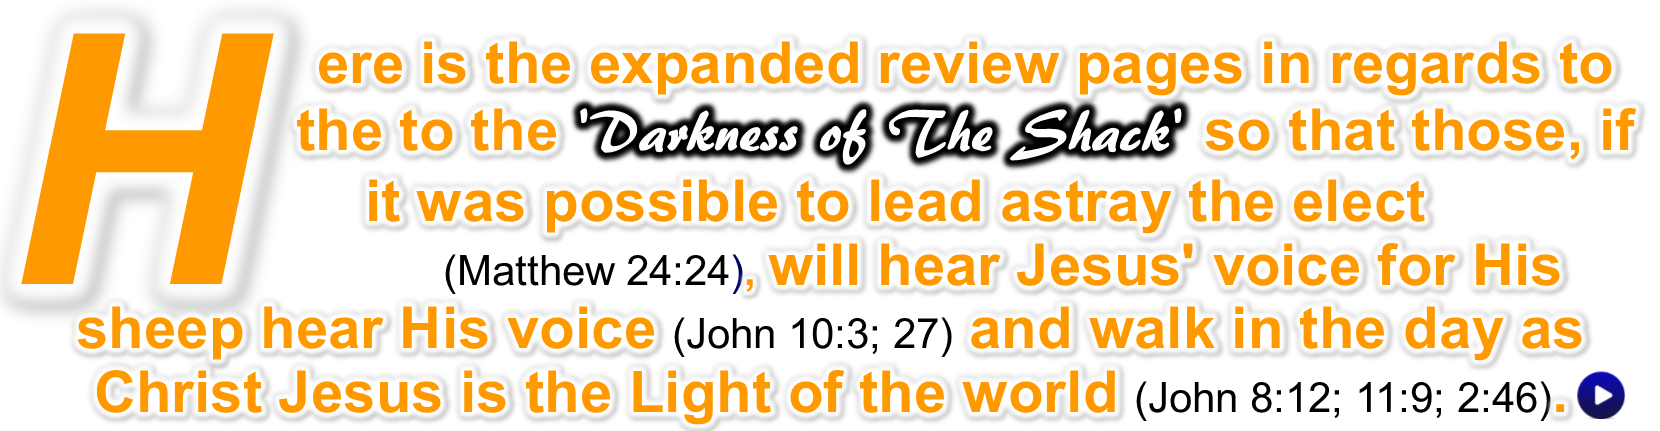 Exposé - The Shack Book Movie Review Darkness of the Shack Matthew 24 24 PNG │ Exposed Grace Truth Spirit GotLifeQuestions #GLQ (1.0.0).png